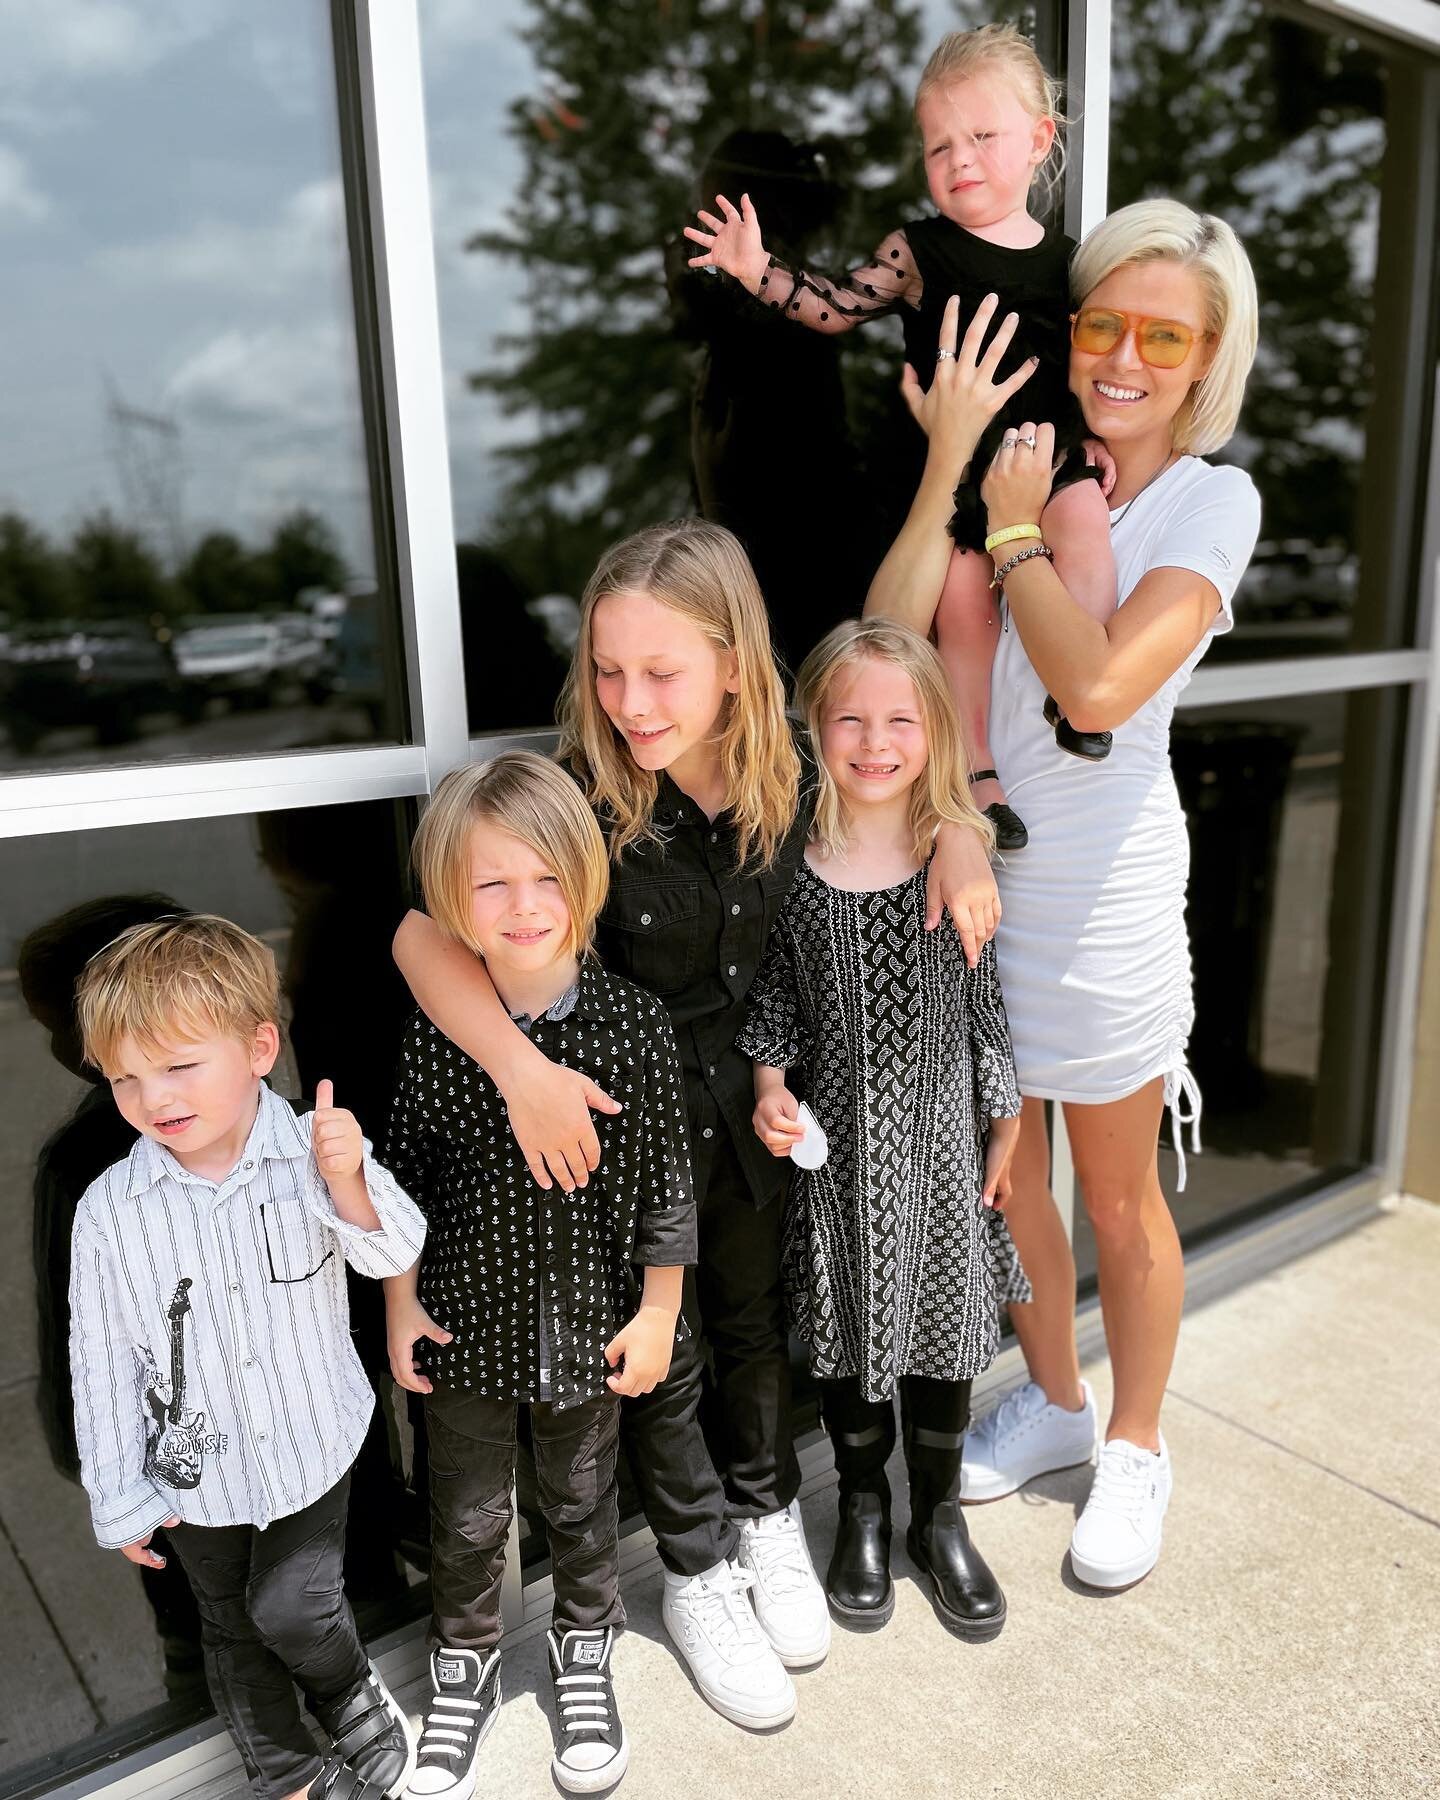 #happymothersday to the Keeper of our Brood, Queen of our Tribe and Head Cheerleader of our Squad!  You never cease to amaze me and am glad to share this team with you! @taybrookebo love you!!